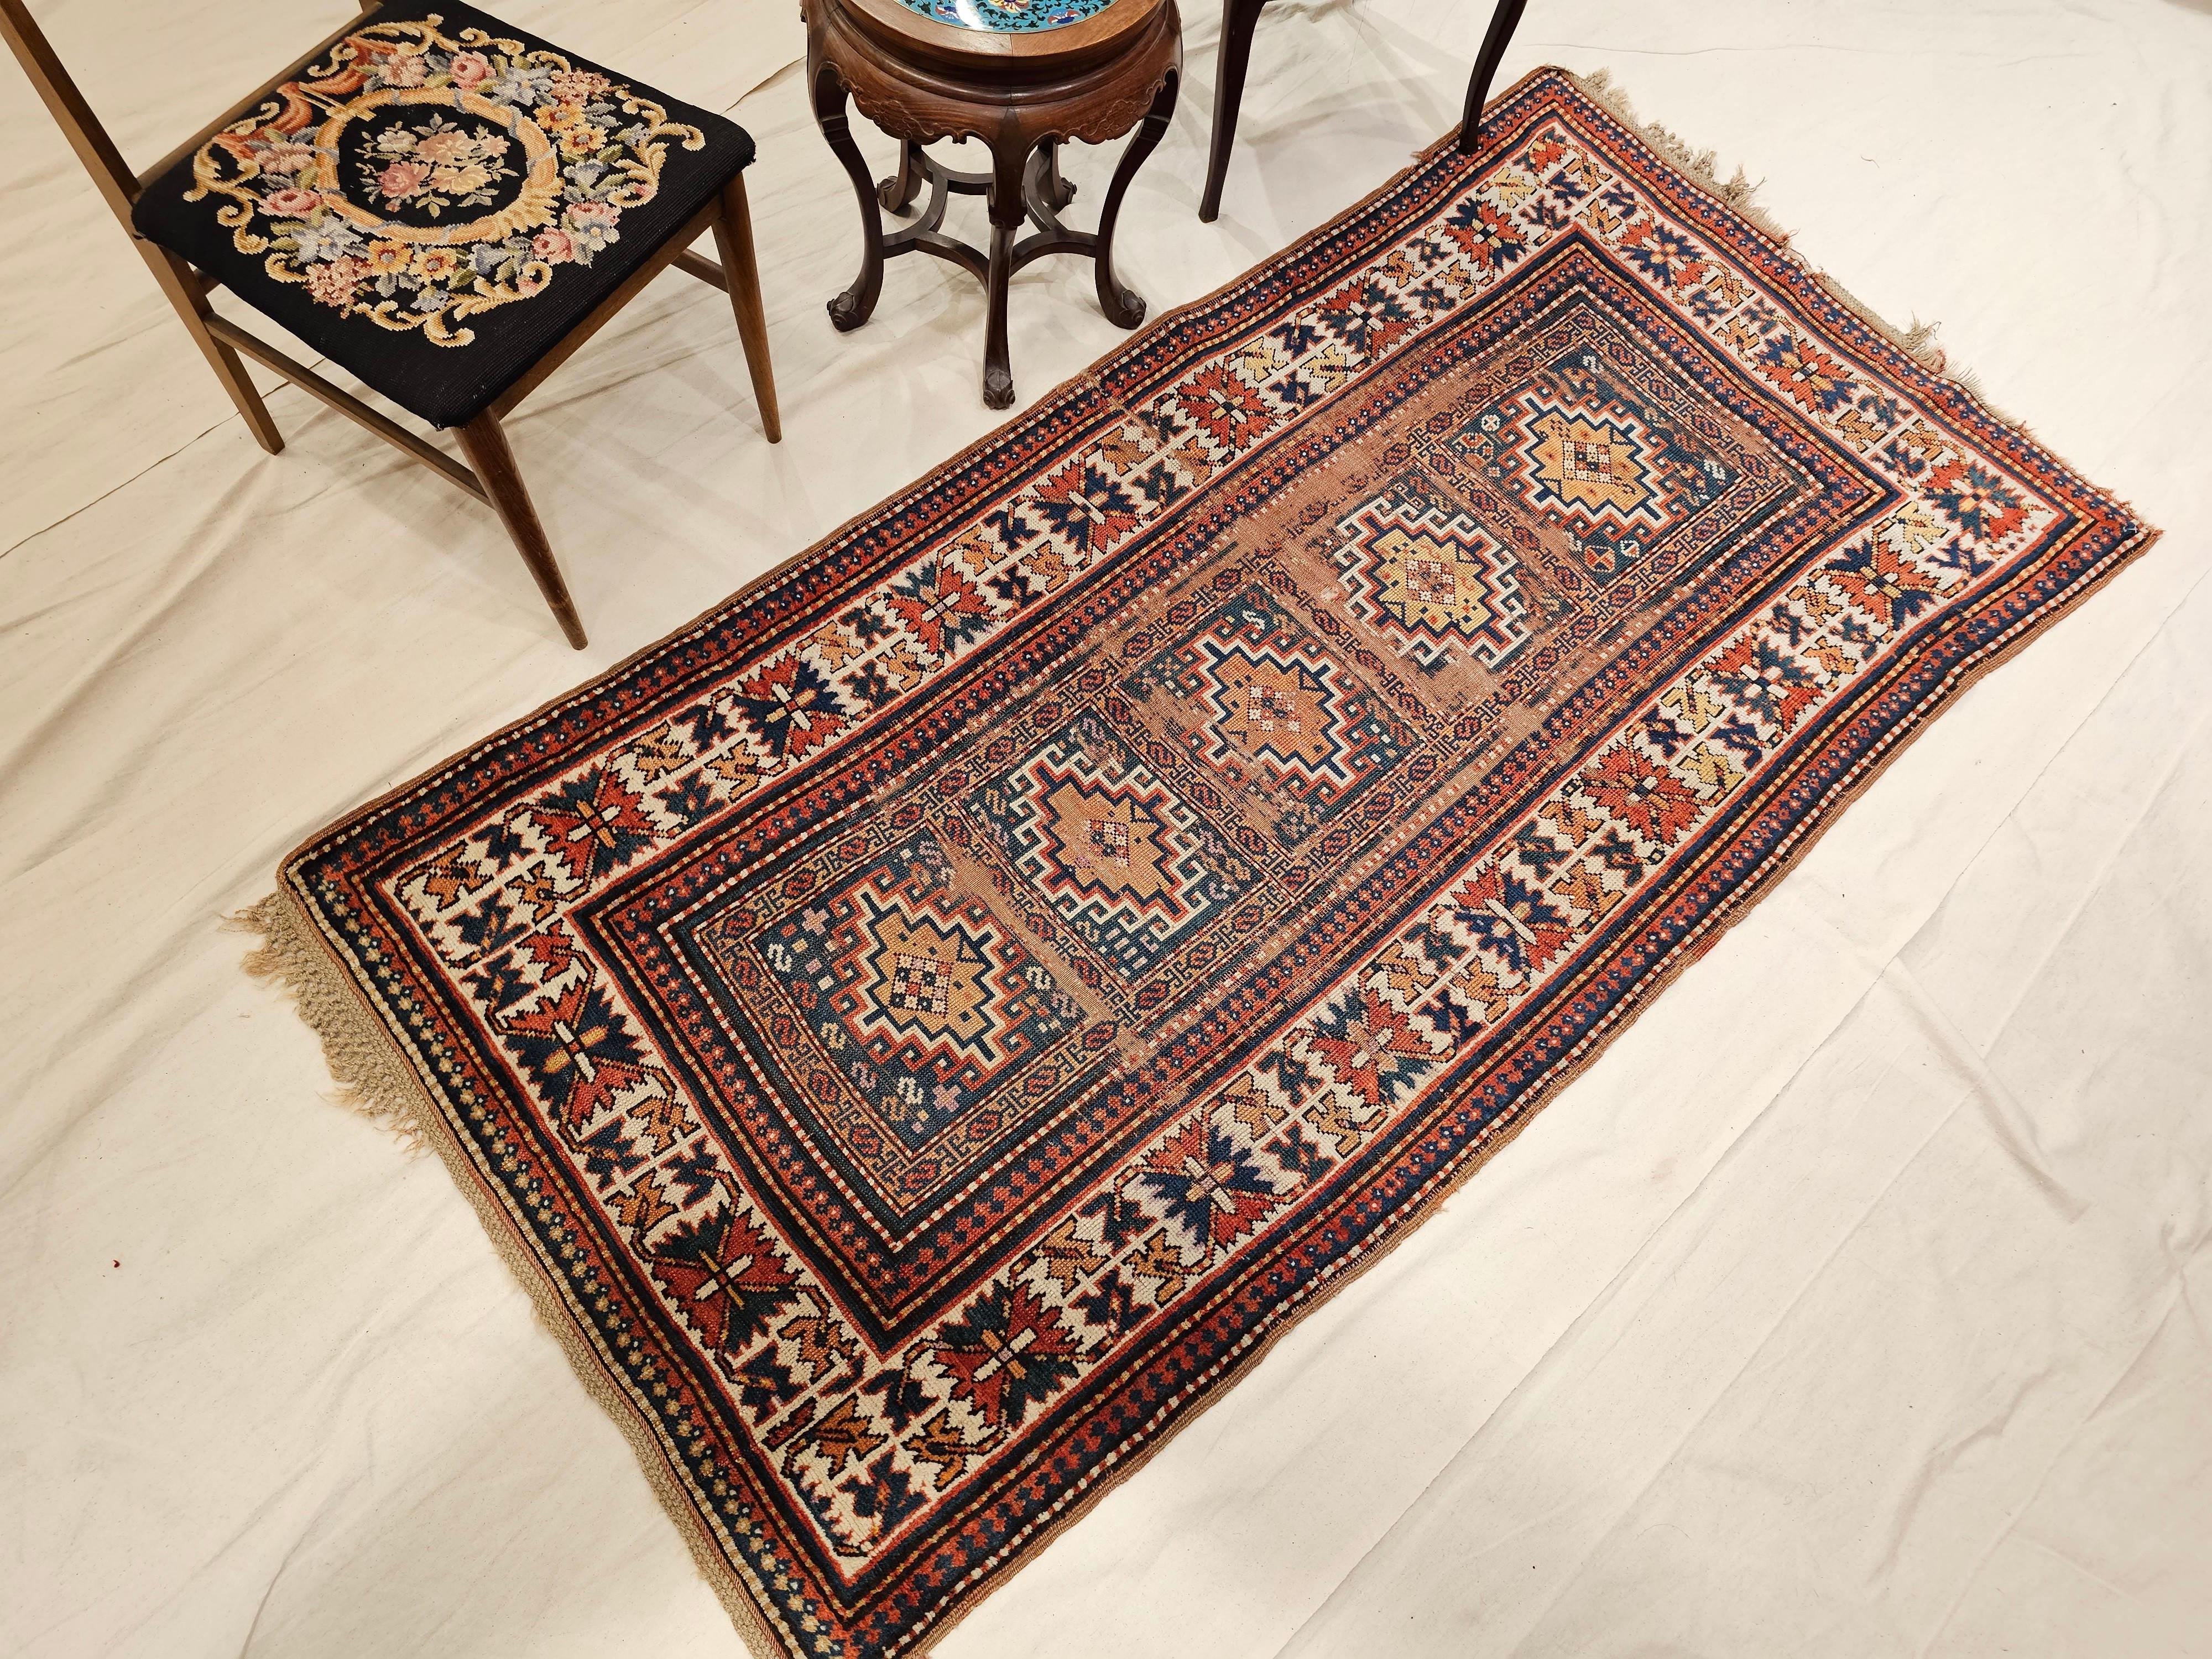 19th Century Caucasian Kazak Area Rug in Geometric Pattern in Blue, Ivory, Red For Sale 3